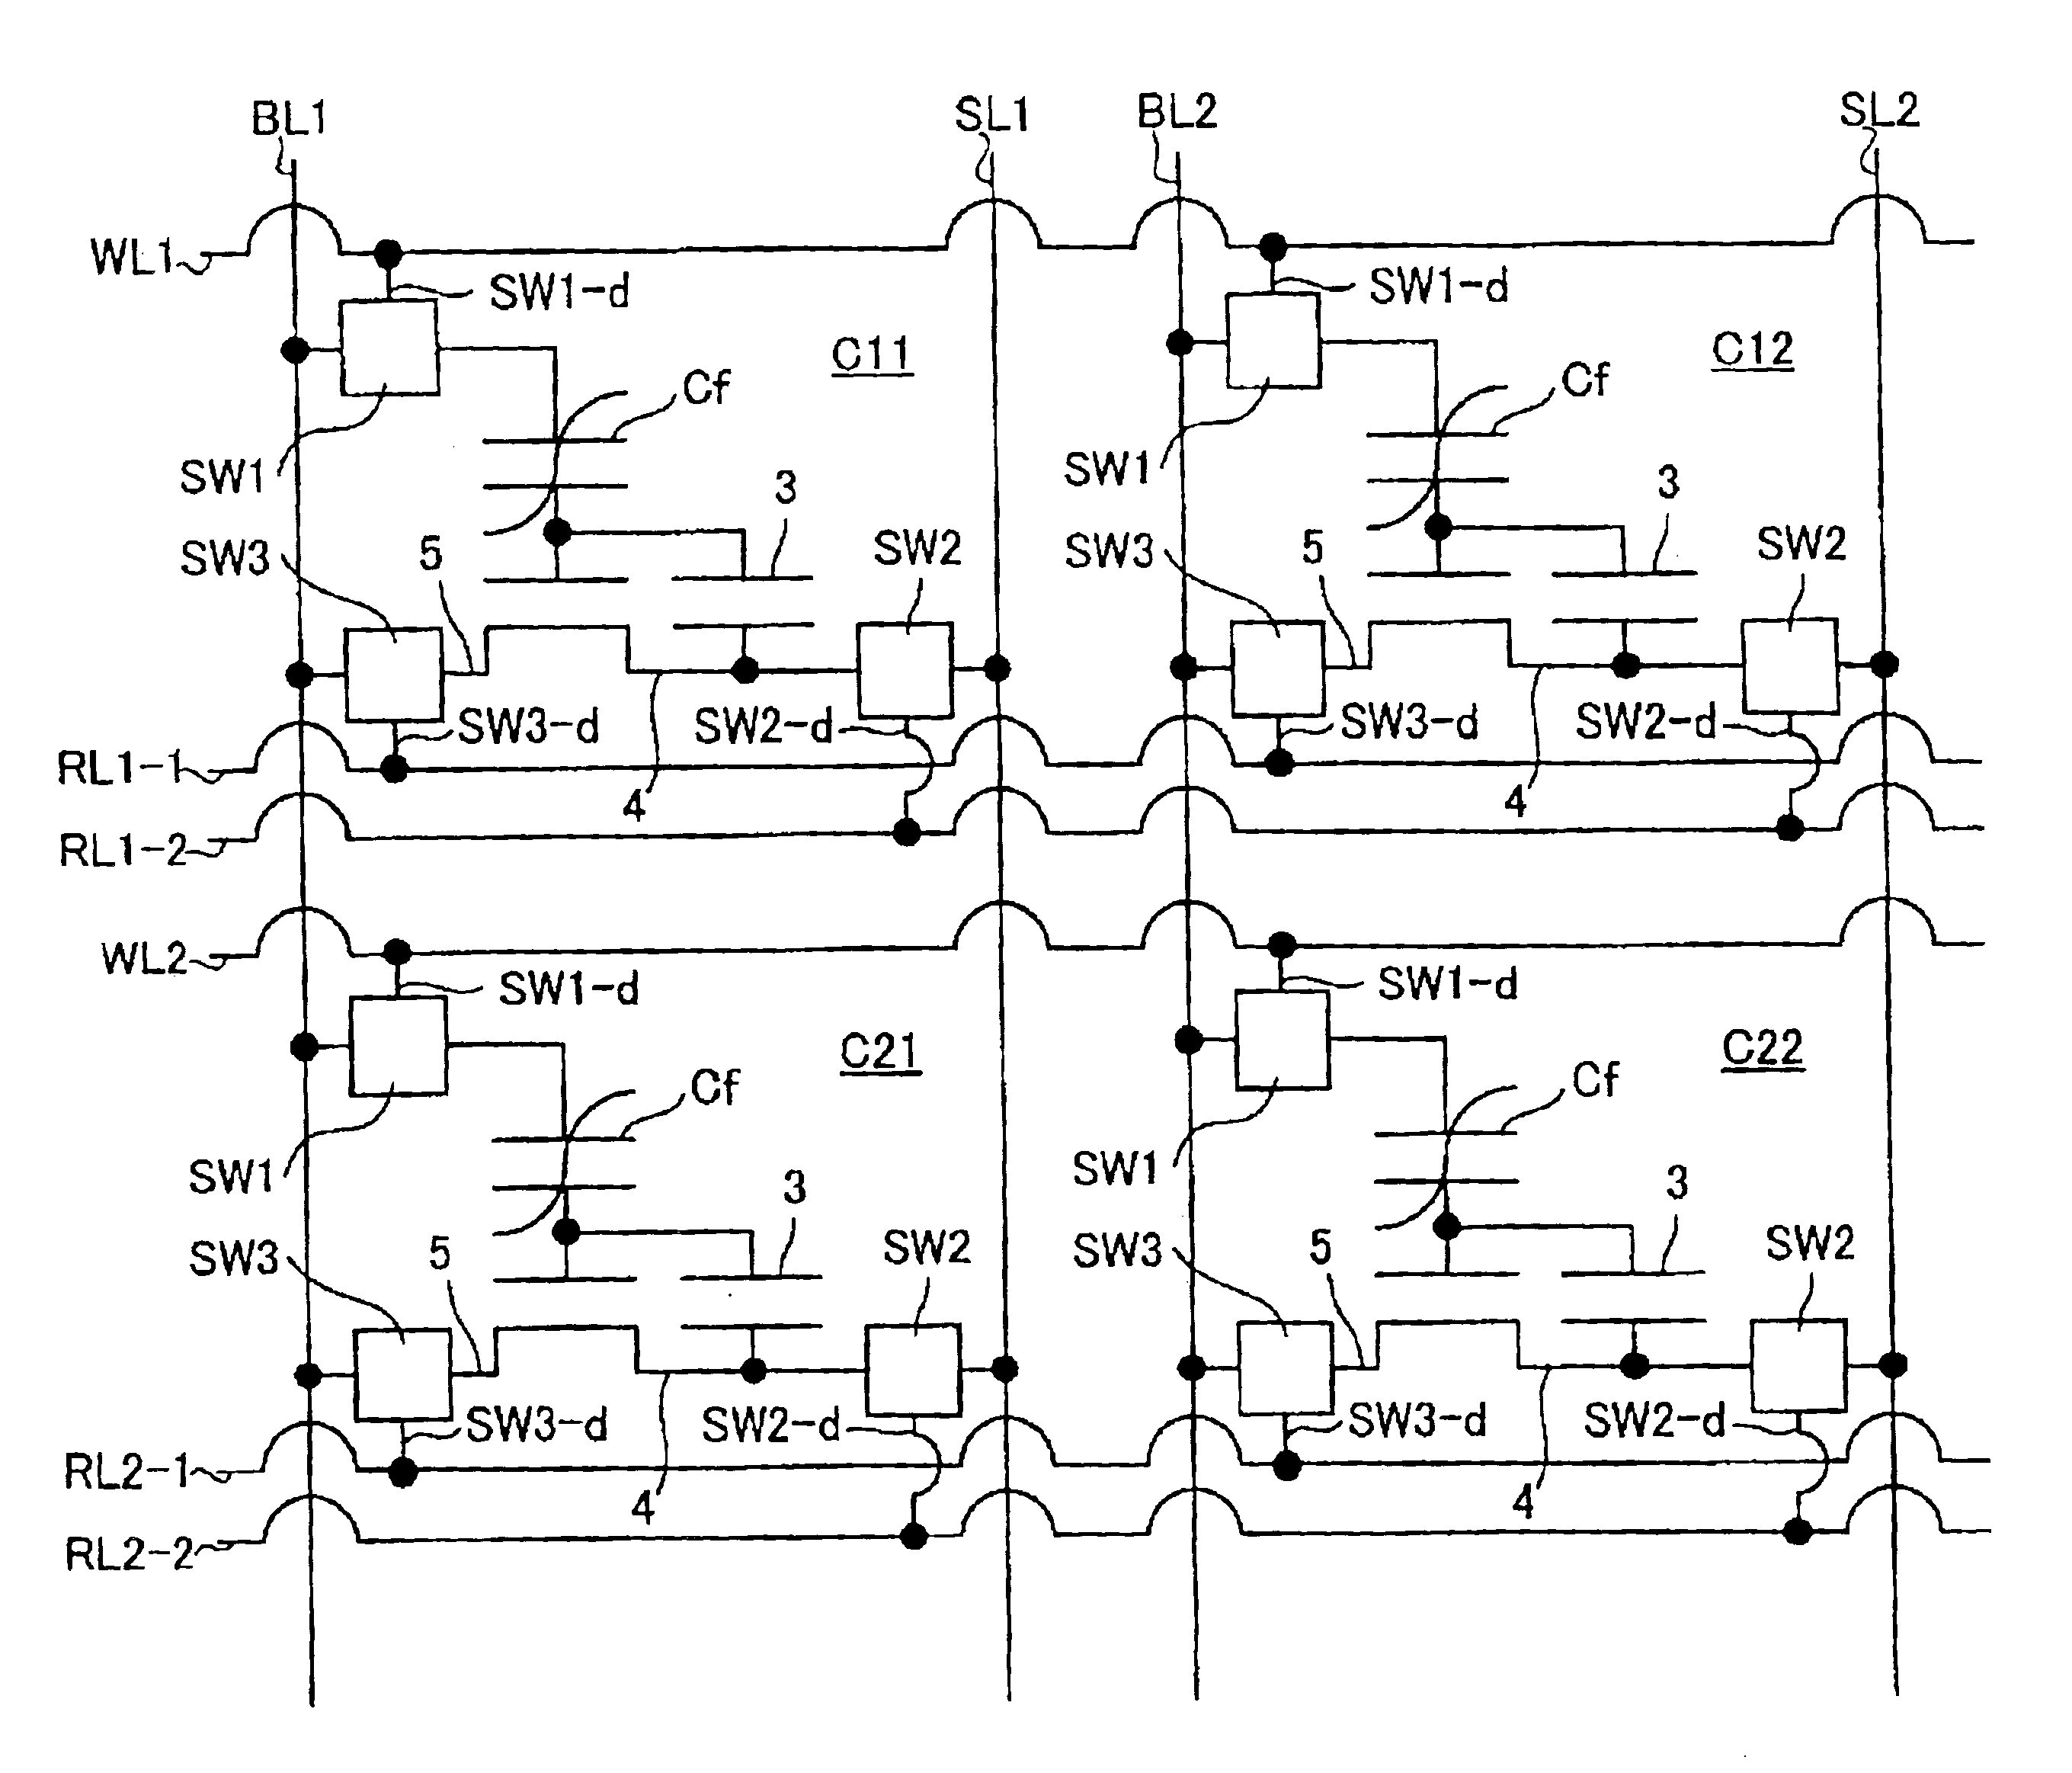 Ferroelectric non-volatile memory device having integral capacitor and gate electrode, and driving method of a ferroelectric non-volatile memory device